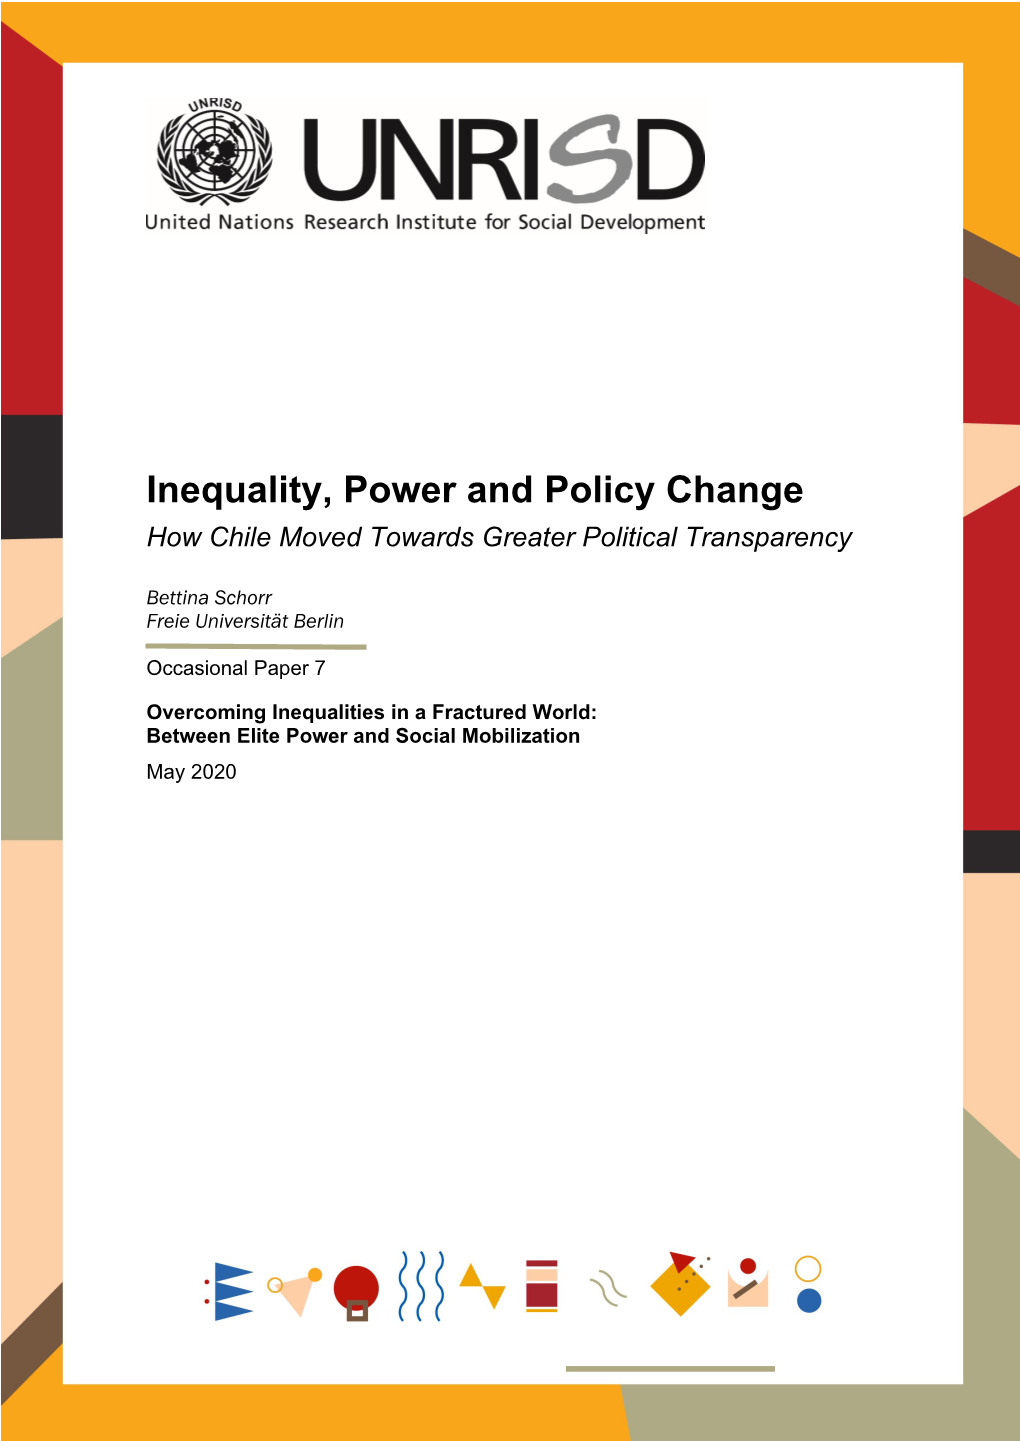 Inequality, Power and Policy Change: How Chile Moved Towards Greater